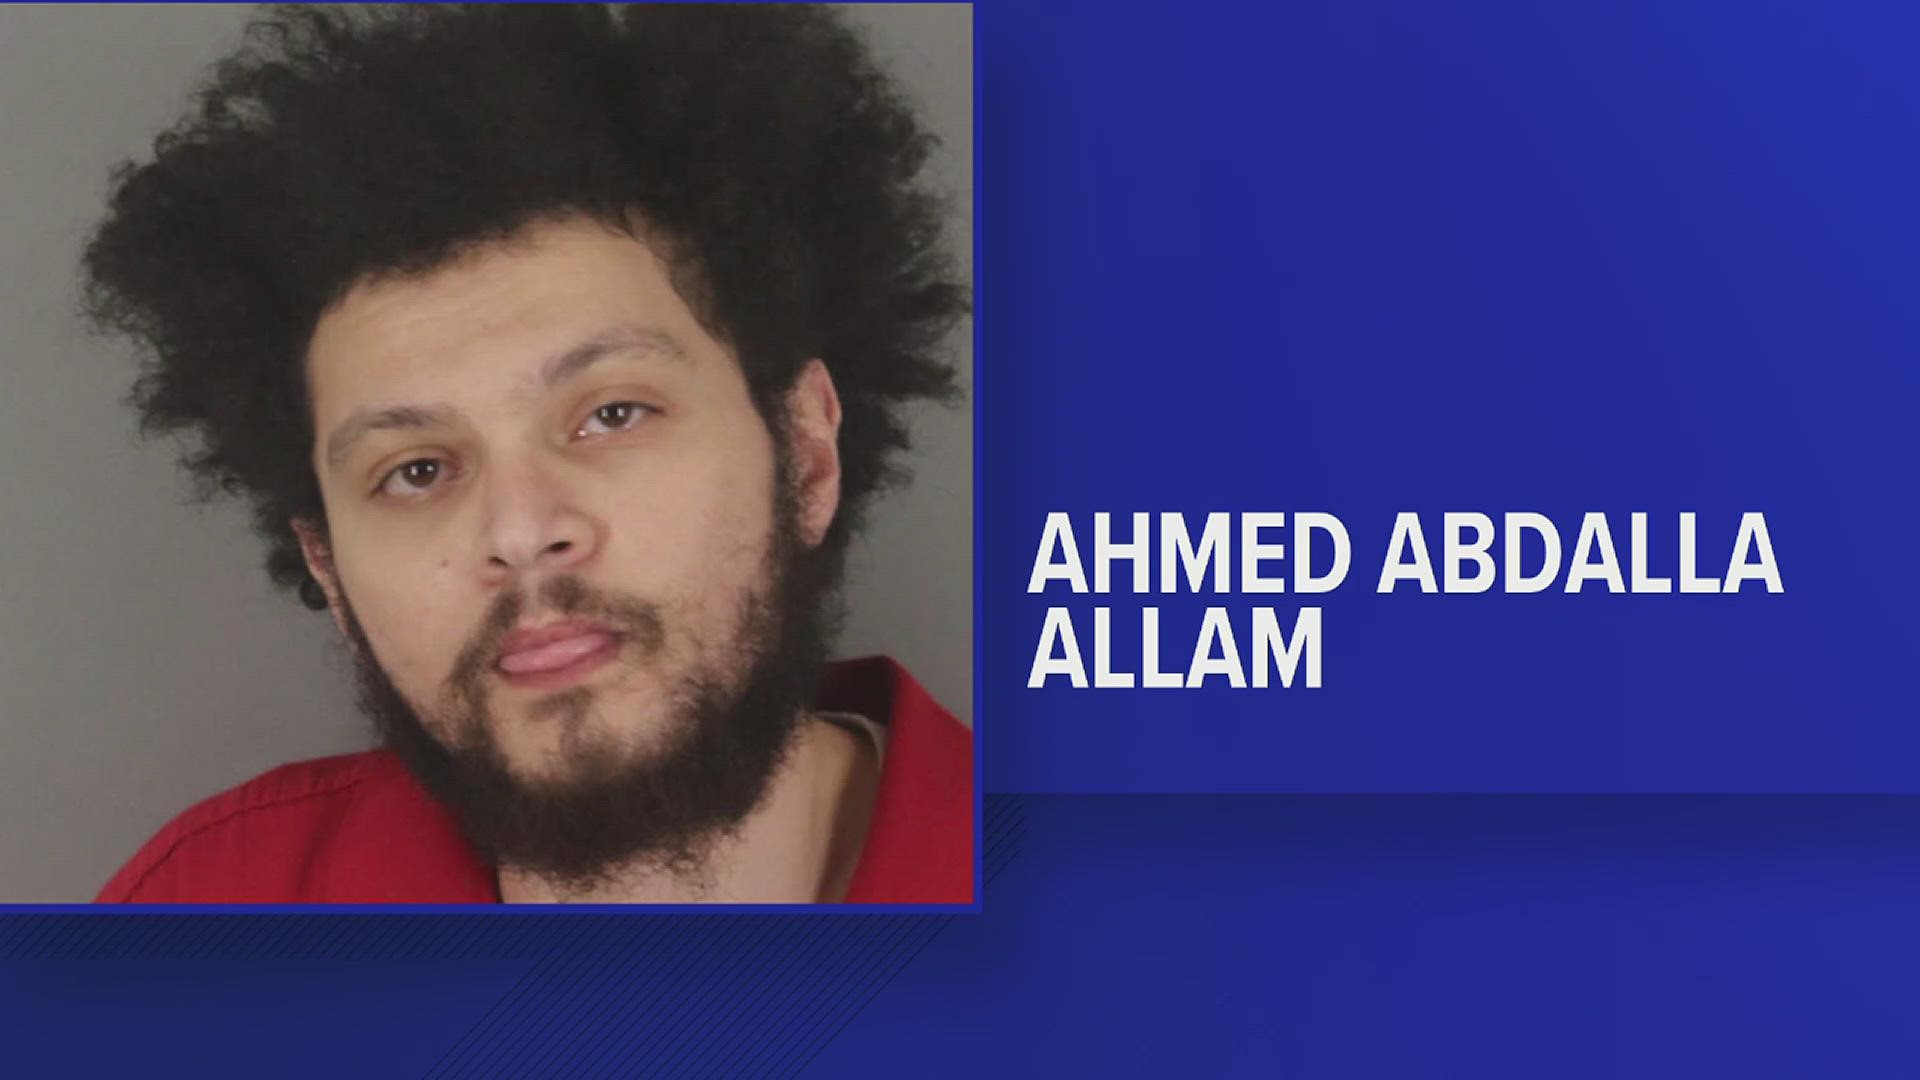 Ahmed Abdalla Allam's defense attorney Ryan Gertz withdrew a request for a psychiatric evaluation. He believes his client is competent to stand trial.